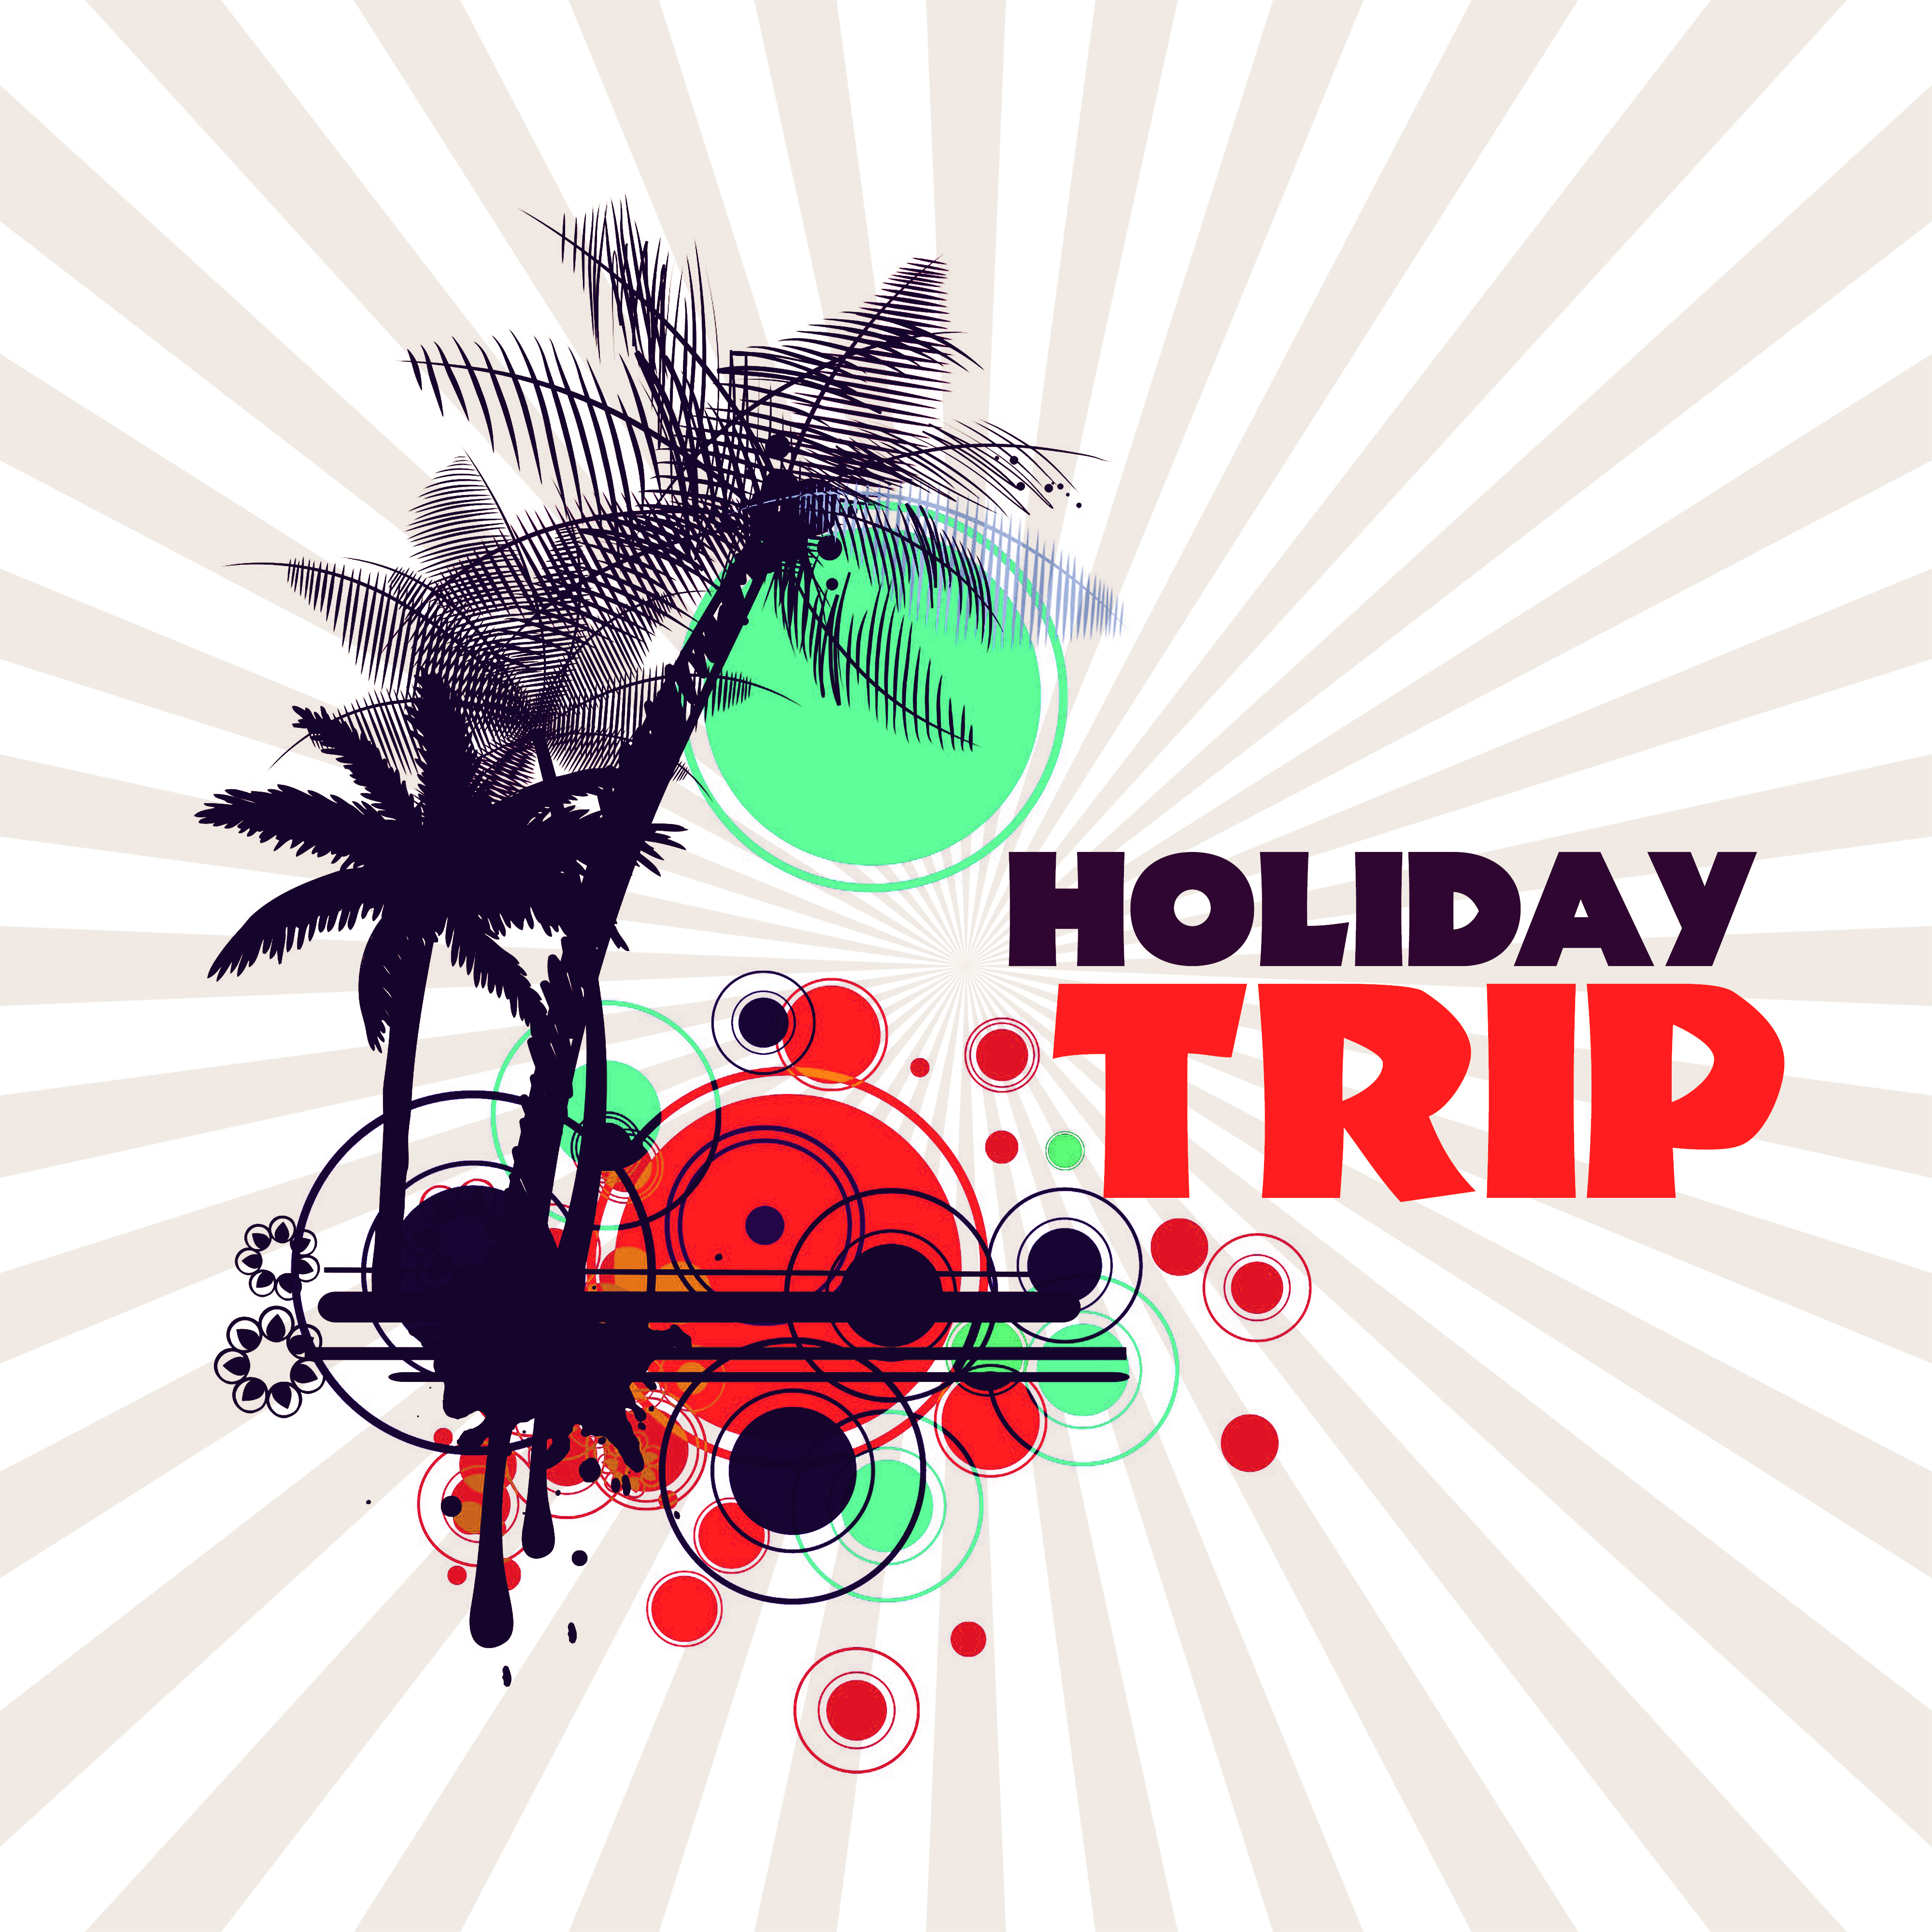 Holiday Trip – Summer Chill Out, Relaxation, **** Chill, Summer Love, Beach Chill, Ibiza Lounge, Relax Under Palms